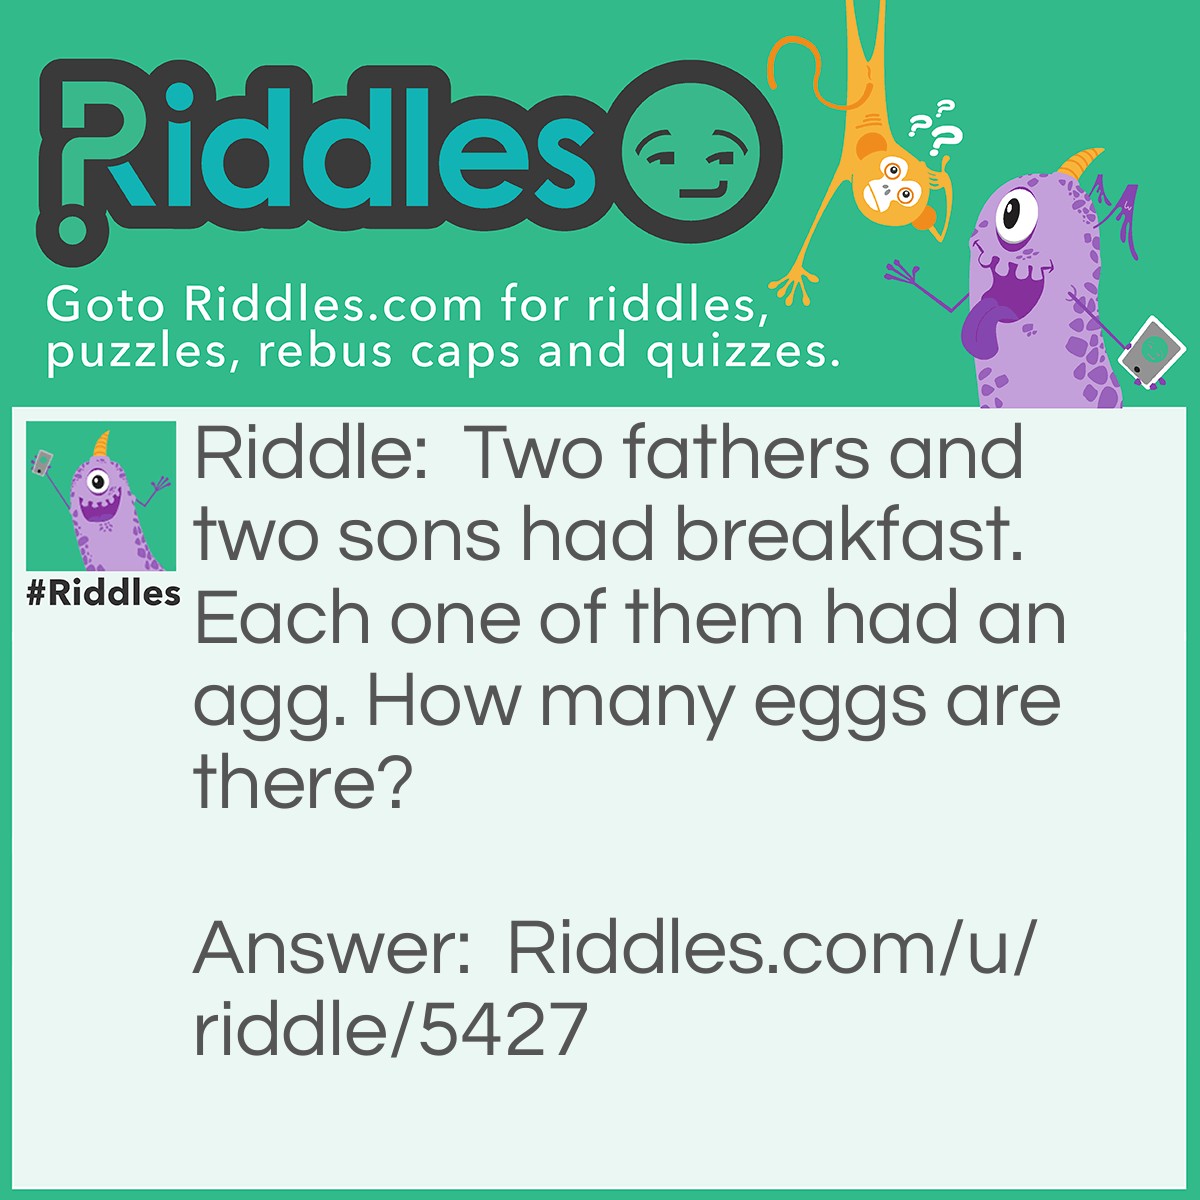 Riddle: Two fathers and two sons had breakfast. Each one of them had an agg. How many eggs are there? Answer: 3 eggs.